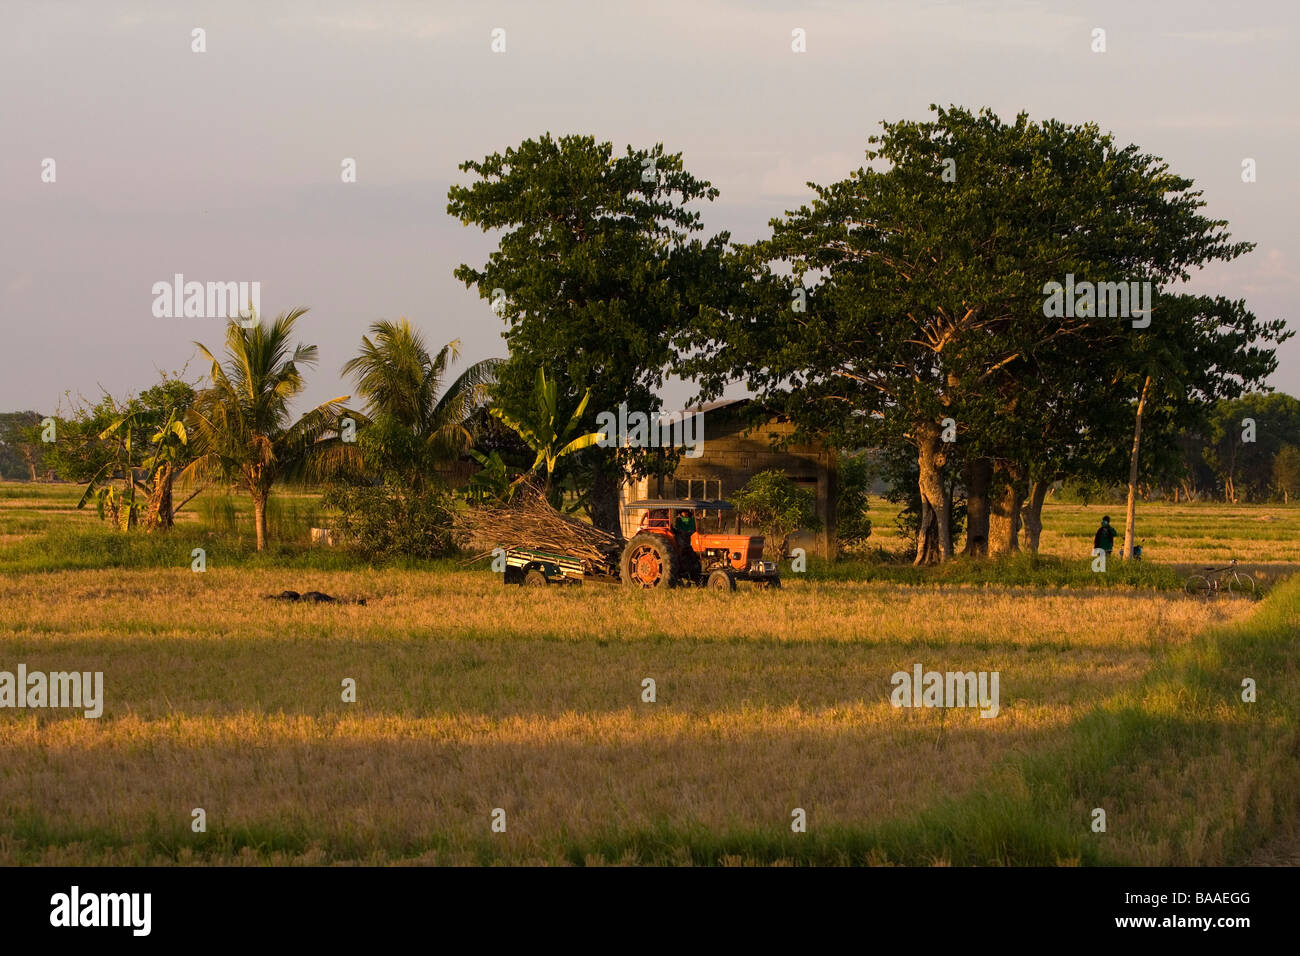 An old tractor in a rice farm in the Philippines Stock Photo